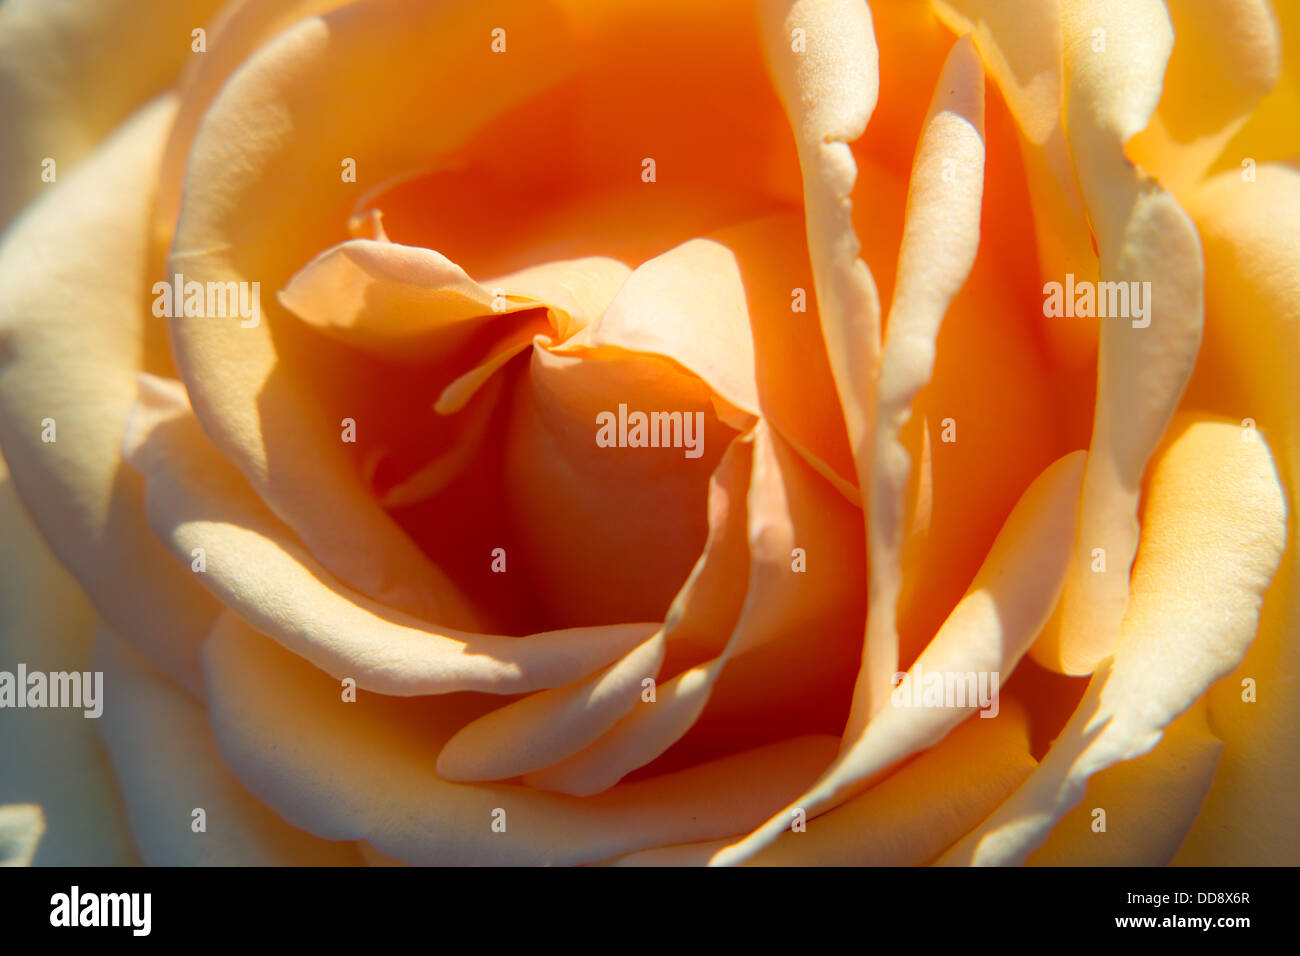 Greetings From Texas. Closeup view of an yellow rose flower Stock Photo